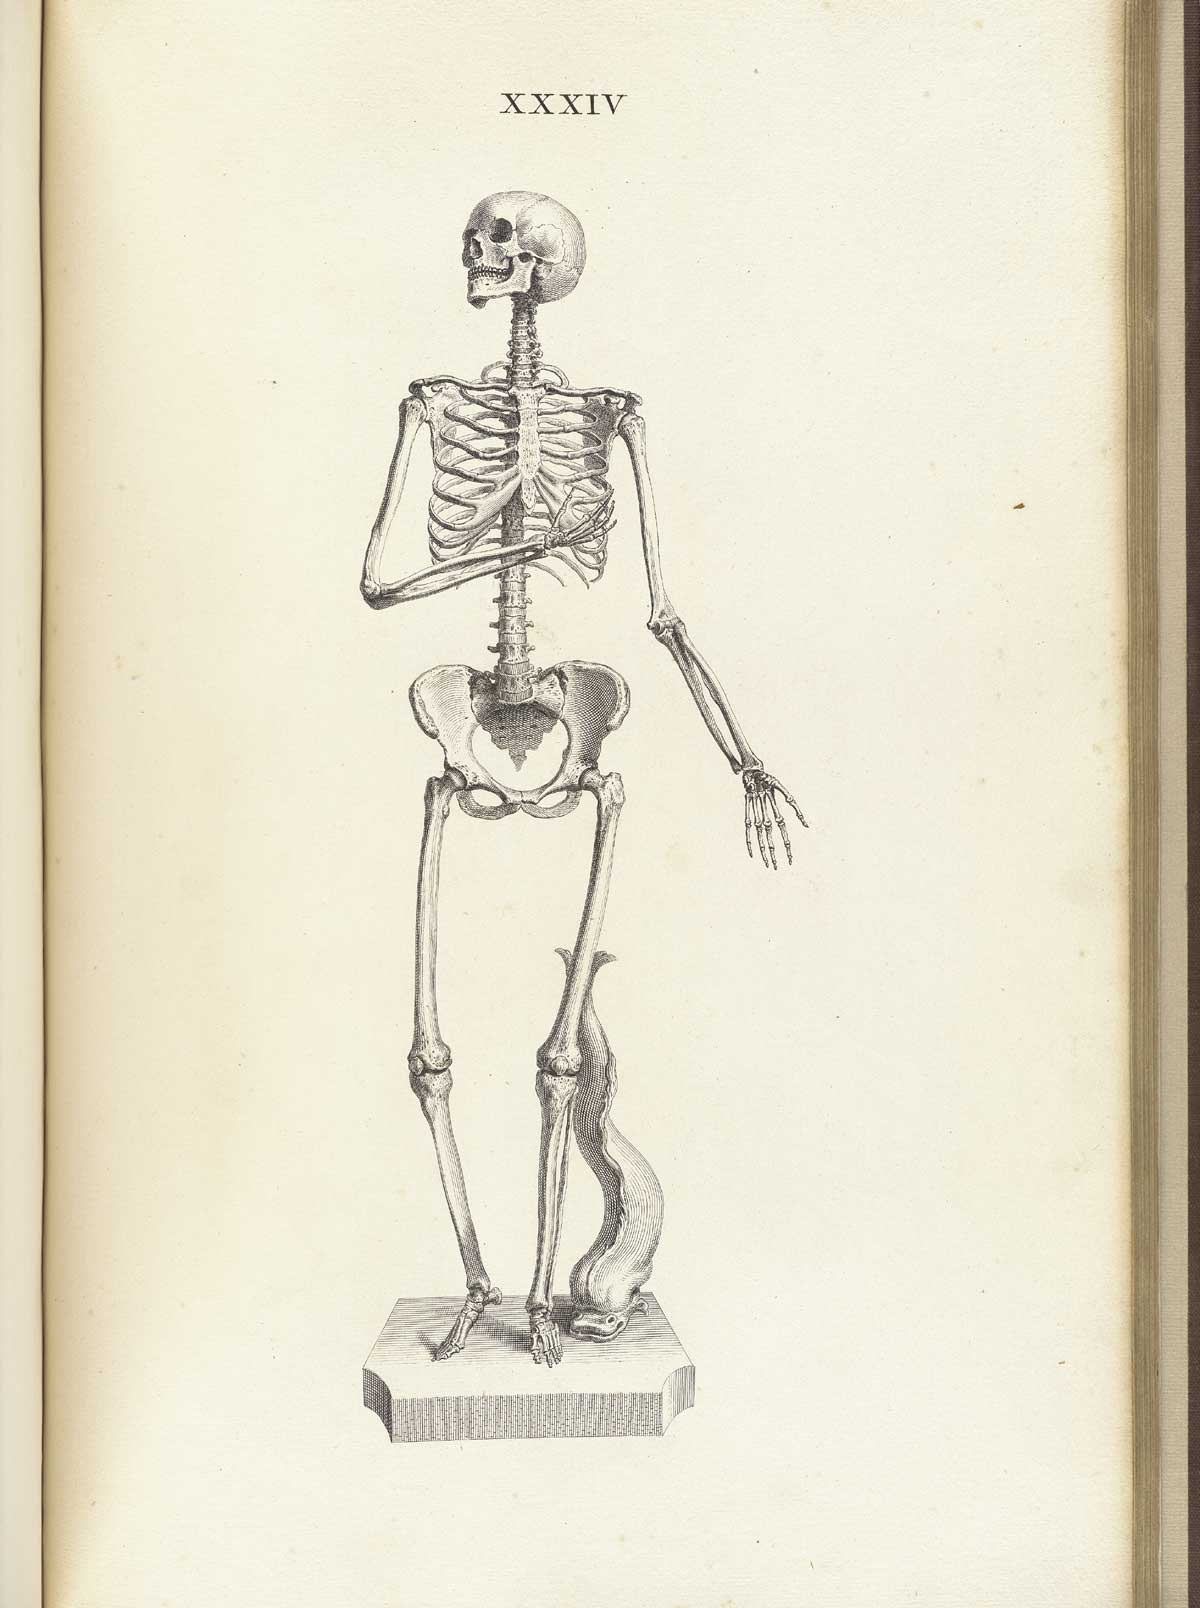 Engraving of a standing facing female skeleton with her right hand brought up to her “stomach” and left hand hanging near her hip, from William Cheselden’s Osteographia, NLM Call no.: WZ 260 C499o 1733.